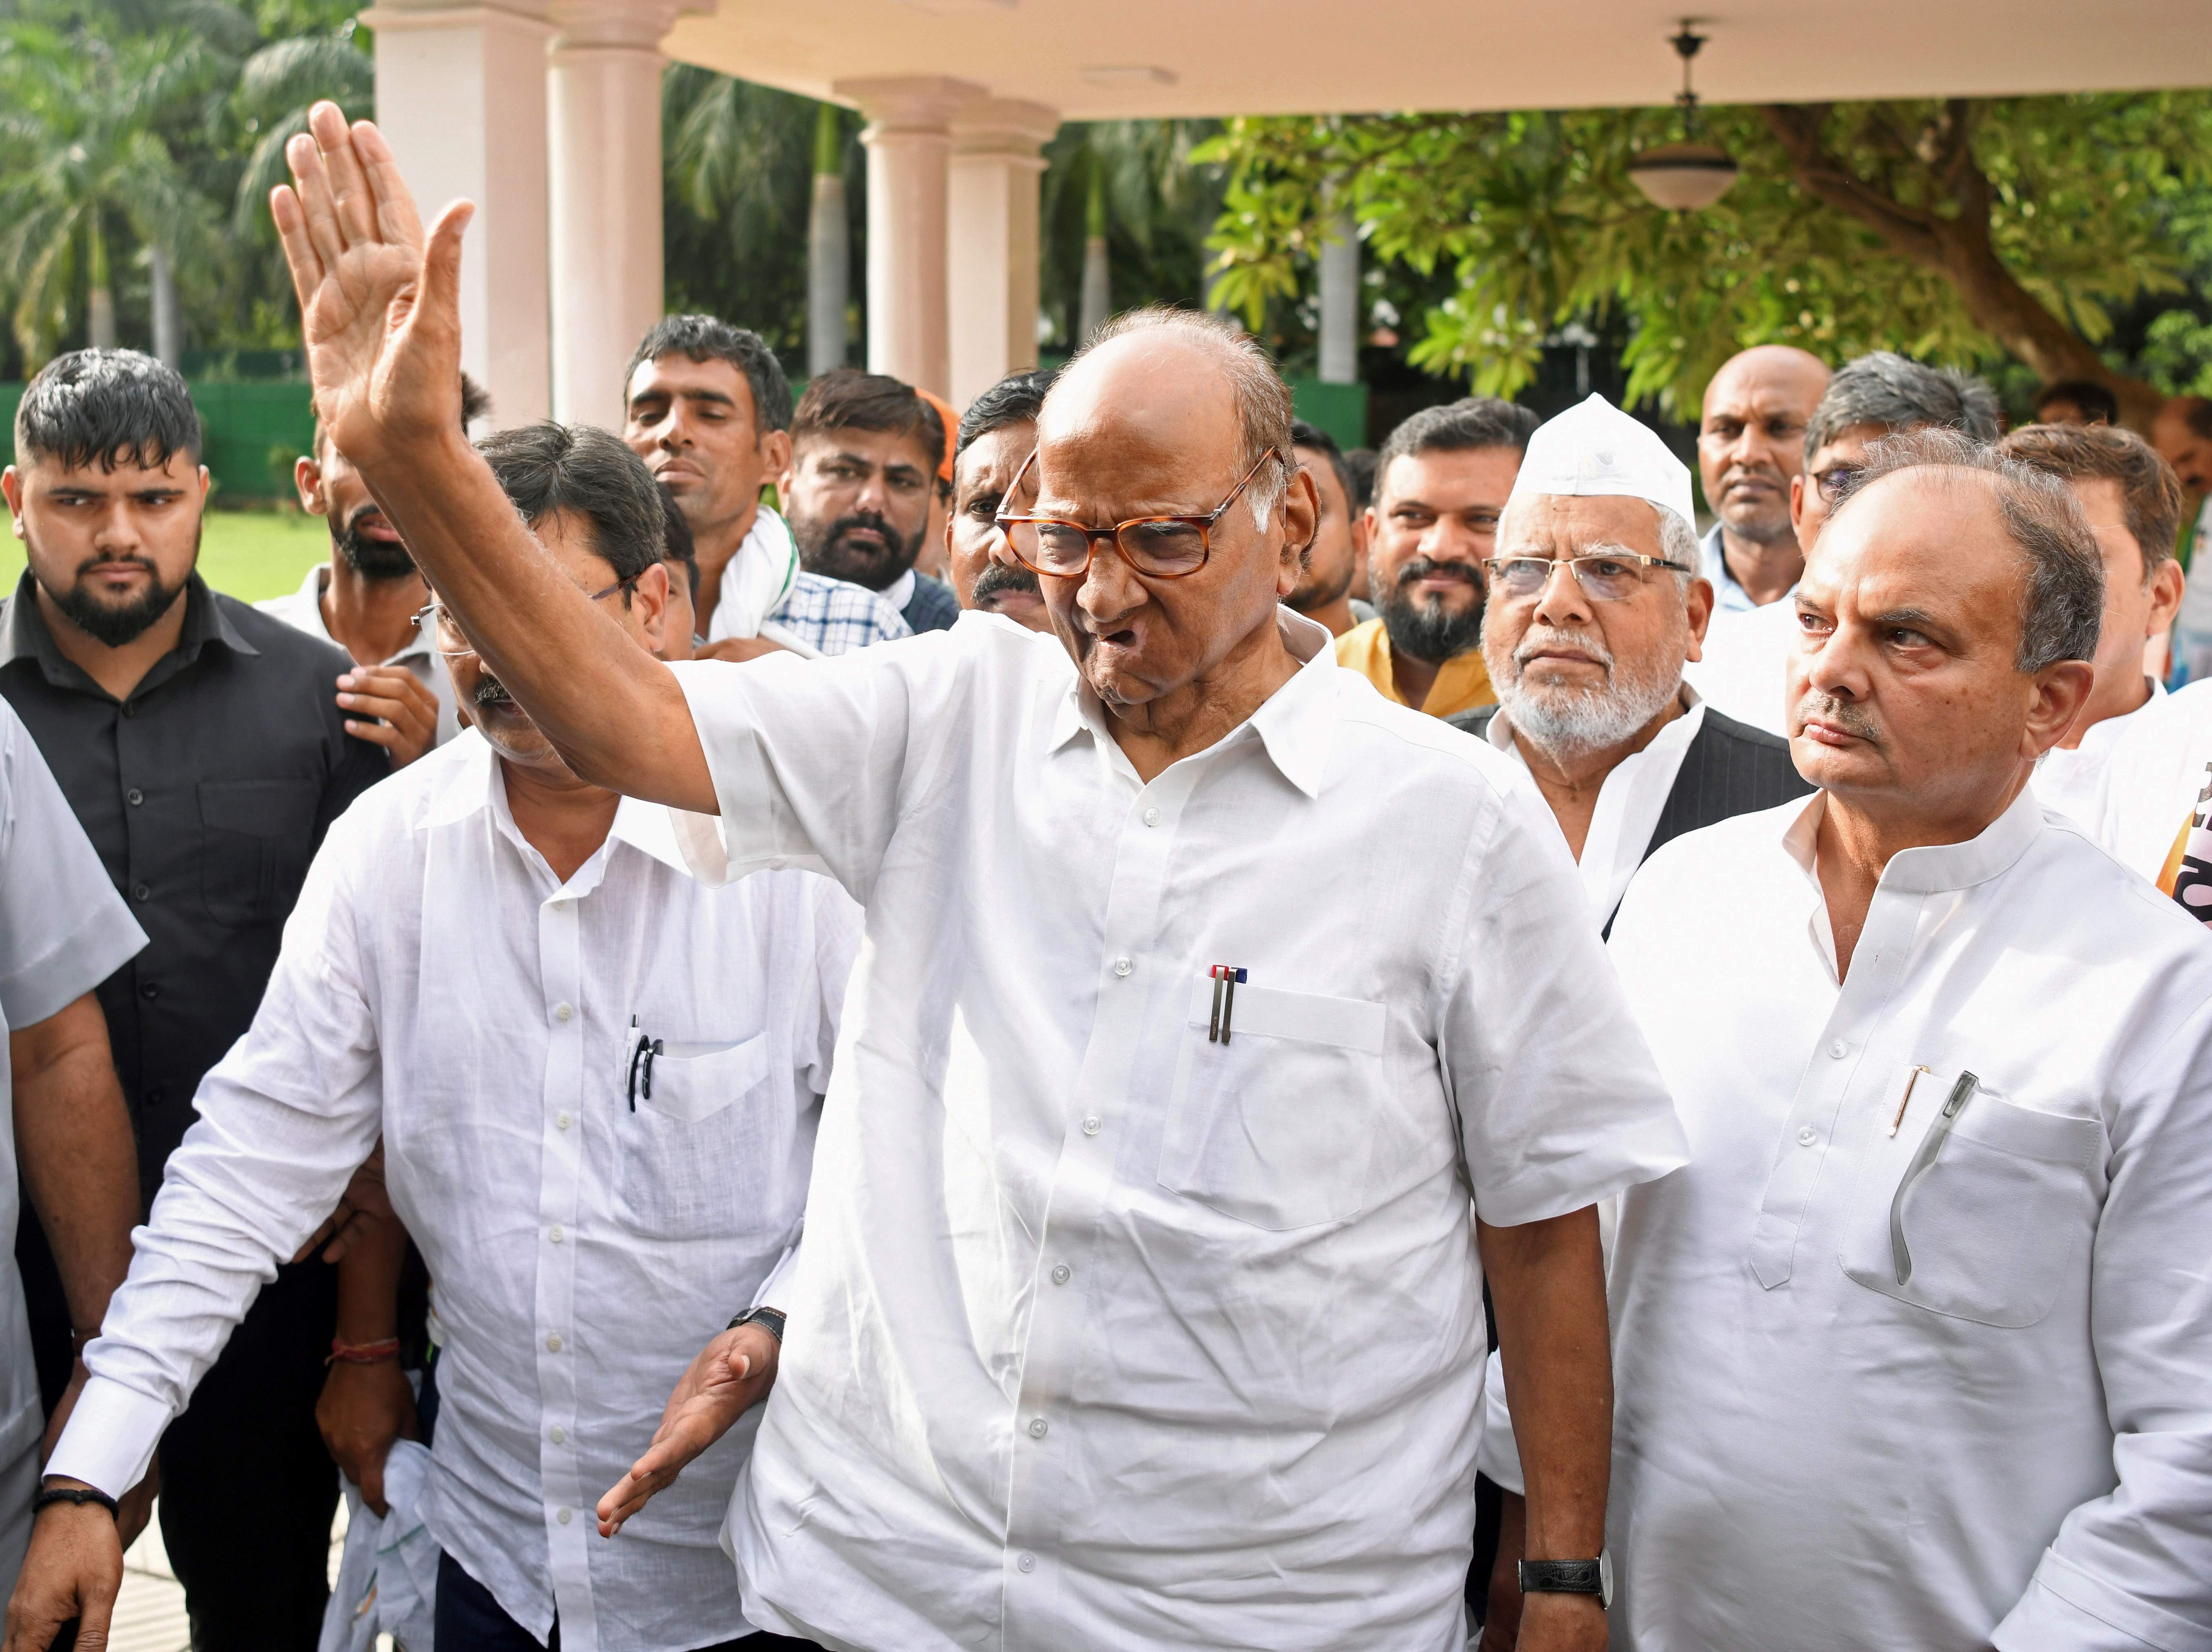 Nationalist Congress Party: Who is the real winner in the Pawar Game?